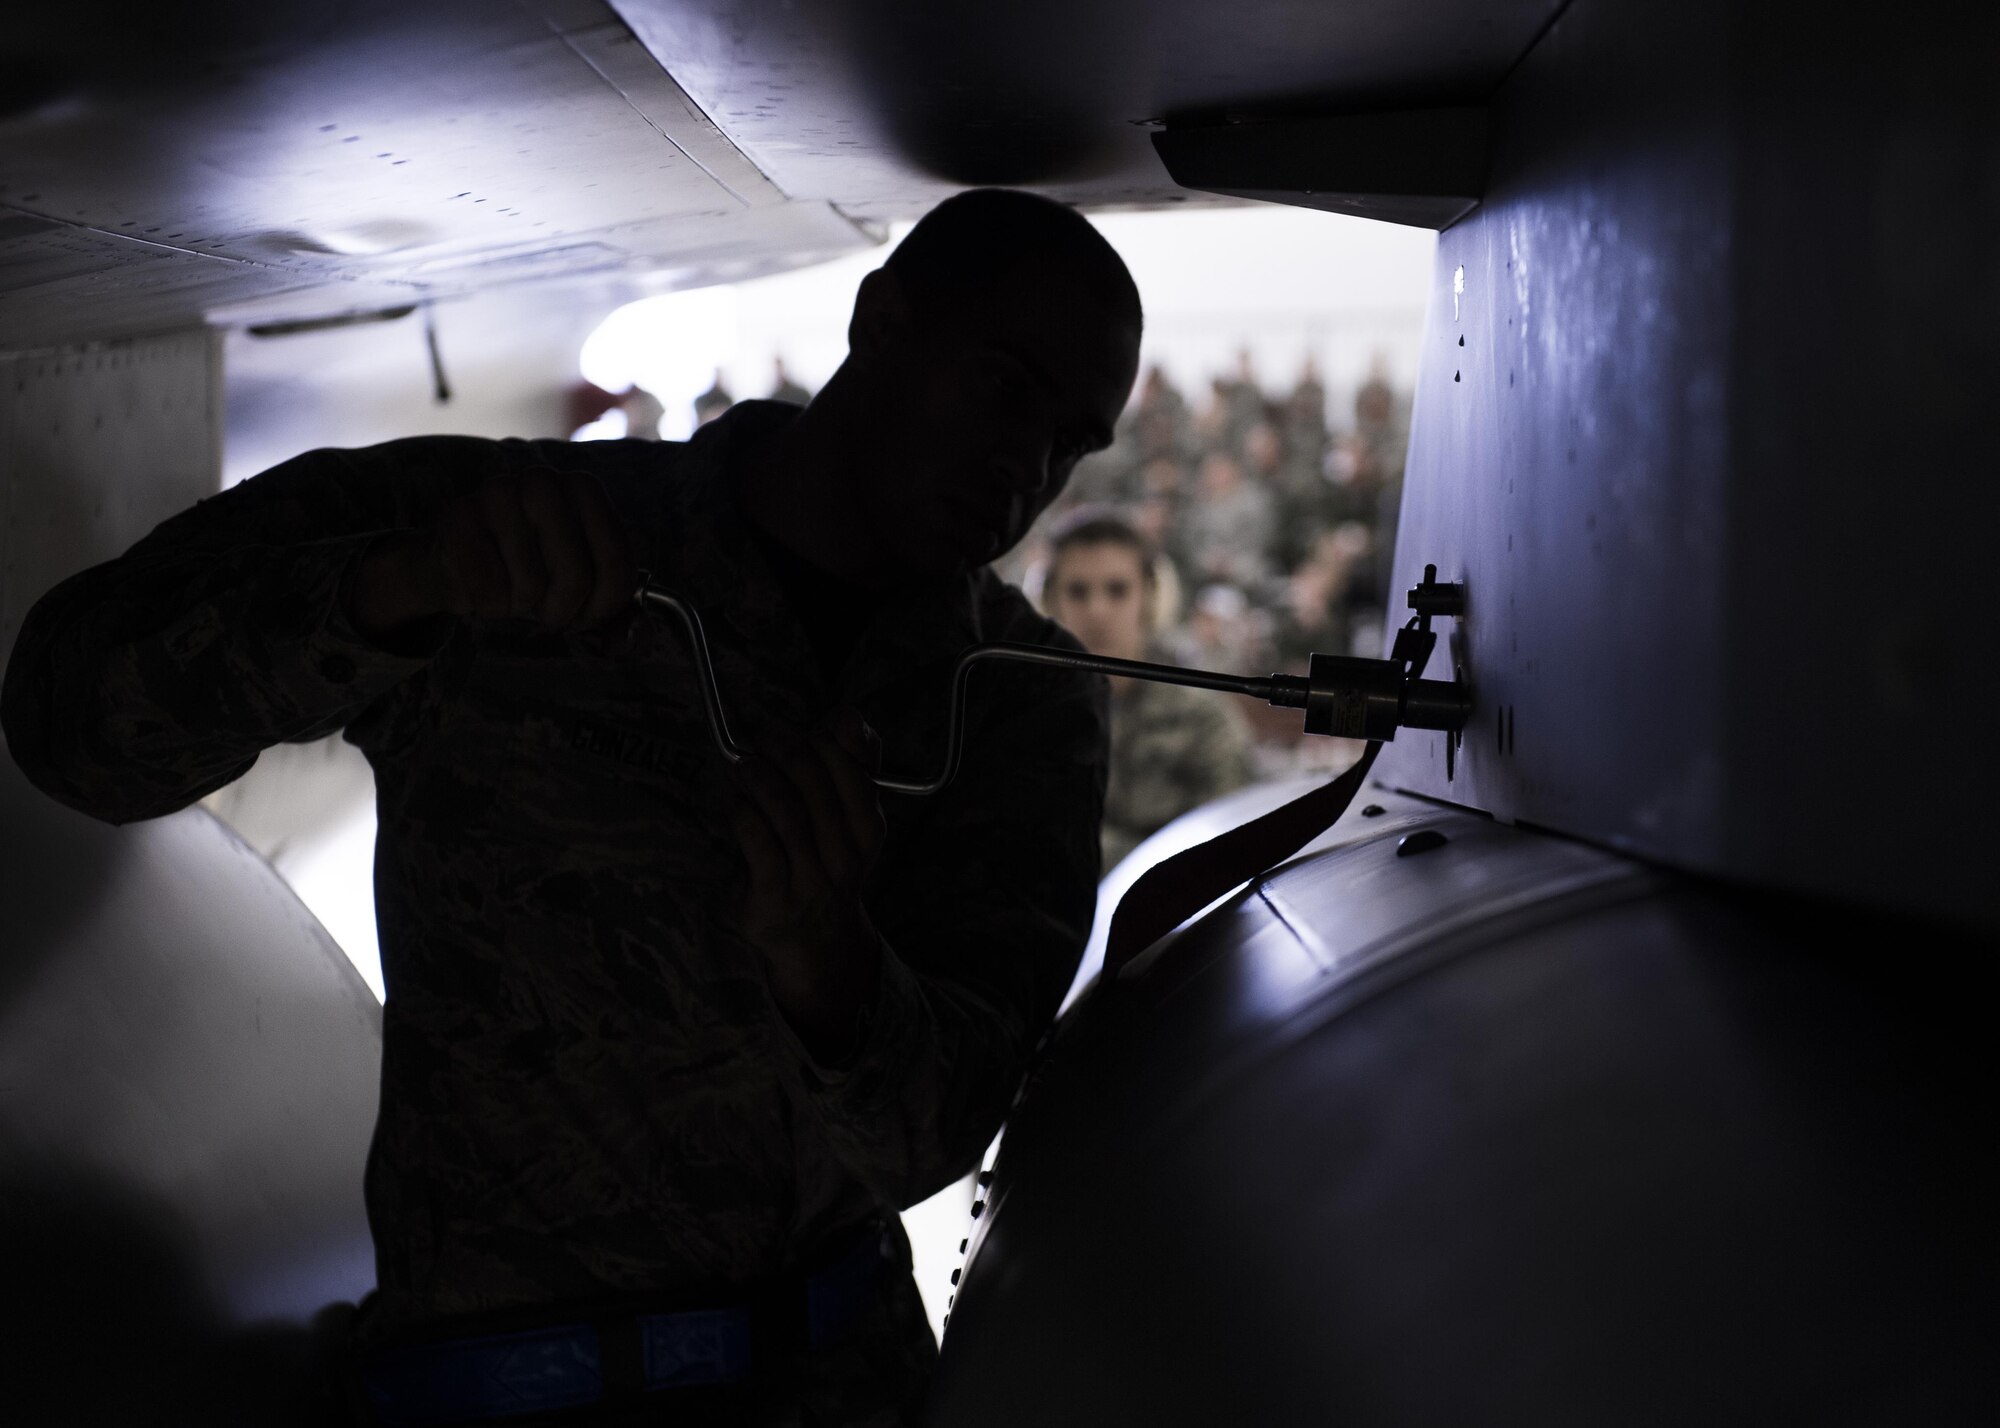 A1C Jonathan, 54th Fighter Group load crew member, secures an inert munition onto an F-16 Fighting Falcon during a quarterly load crew competition at Holloman Air Force Base, N.M., Jan. 20, 2016. The weapons load crews for German Air Force Tornado, F-16 Fighting Falcon and MQ-9 Reaper competed against each other to load weapons the most efficiently and with the least amount of procedural errors. Points for the competition are awarded based on weapons loading, tool kit inspection and uniform inspection categories. (U.S. Air Force photo by Senior Airman Chase Cannon/ Released)